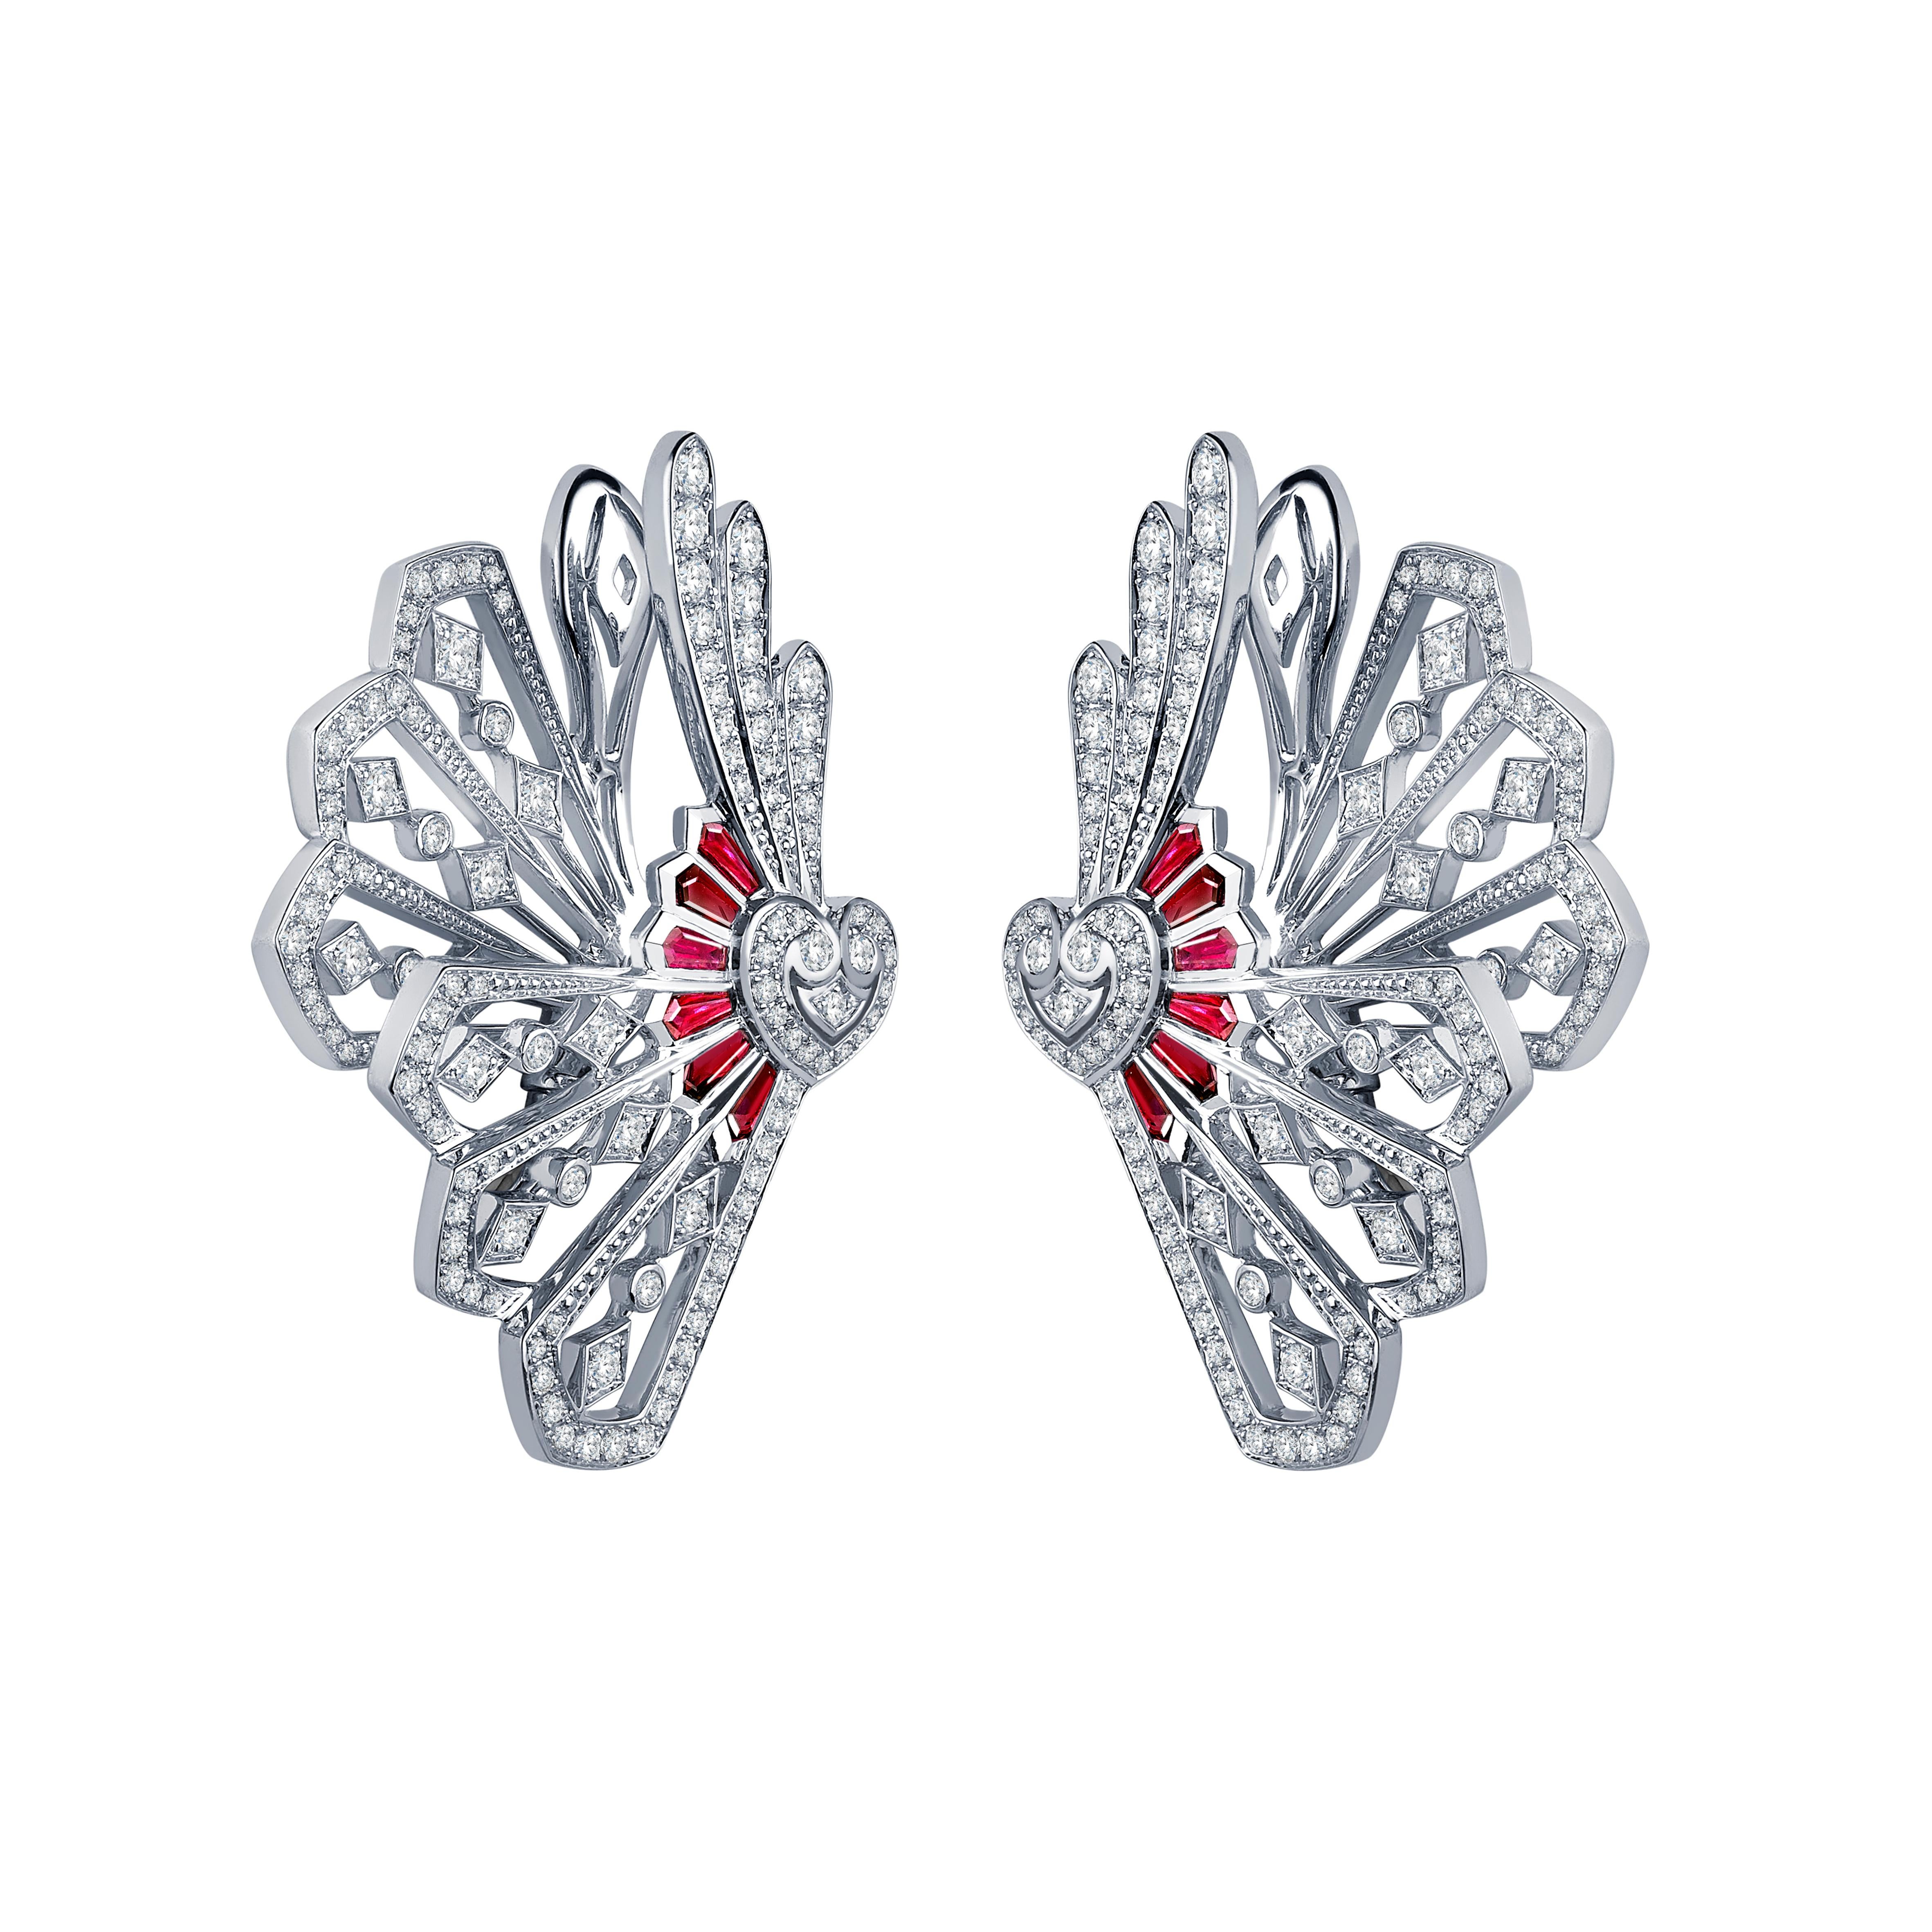 A pair of 18 karat white gold climber earrings from the House of Garrard Fanfare collection set with 236 round white diamonds weighing 1.80 carats and 12 calibre cut rubies weighing 0.78 carats. 

236 round white diamonds weighing 1.80 carats
12